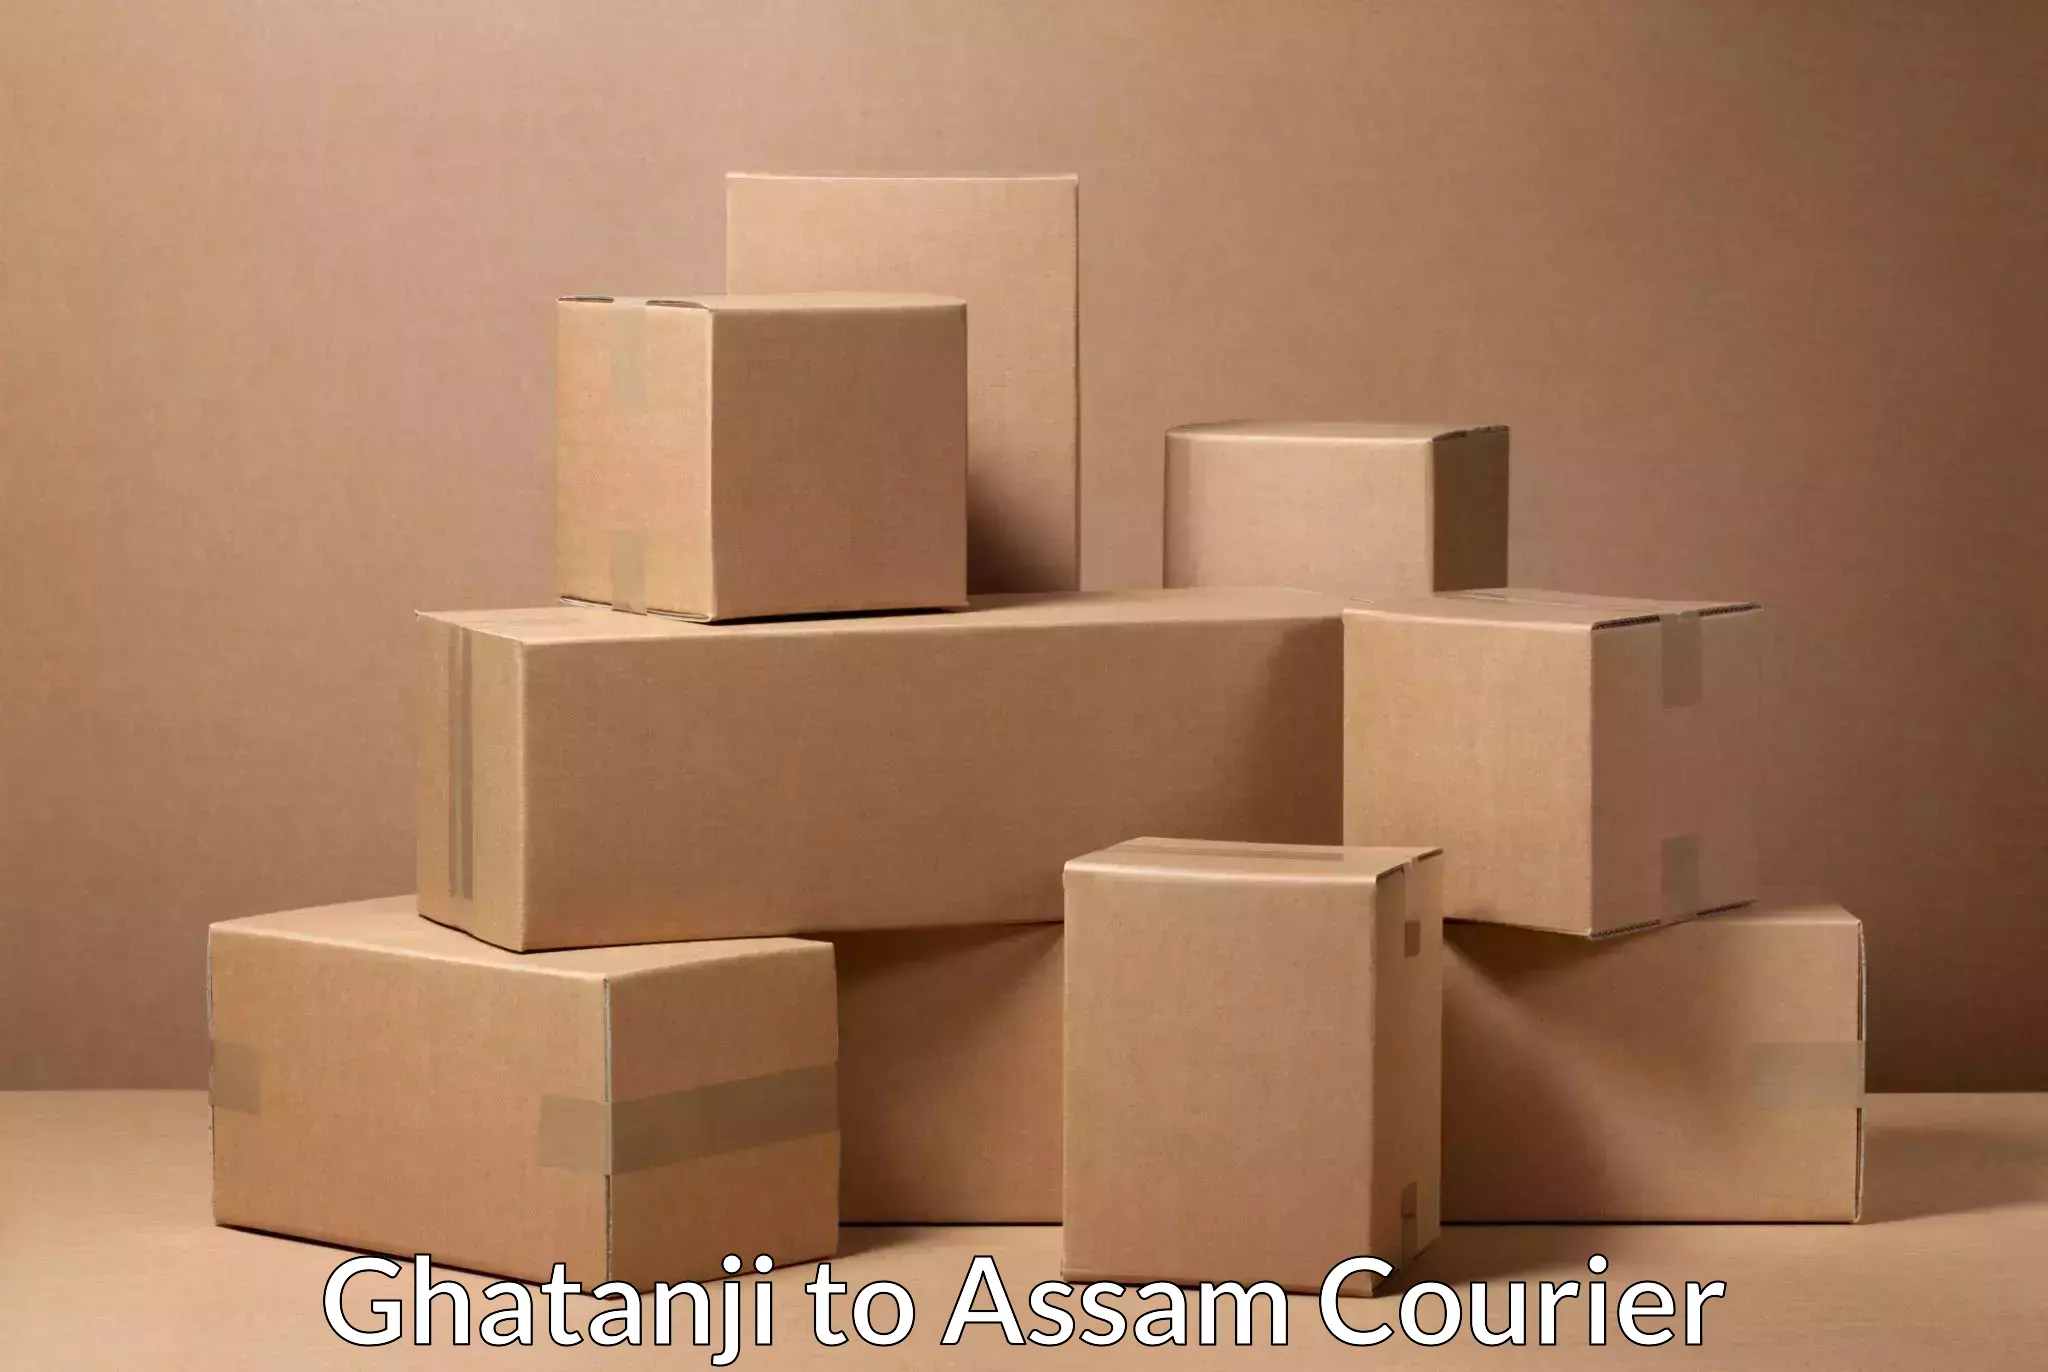 Automated shipping processes Ghatanji to Assam